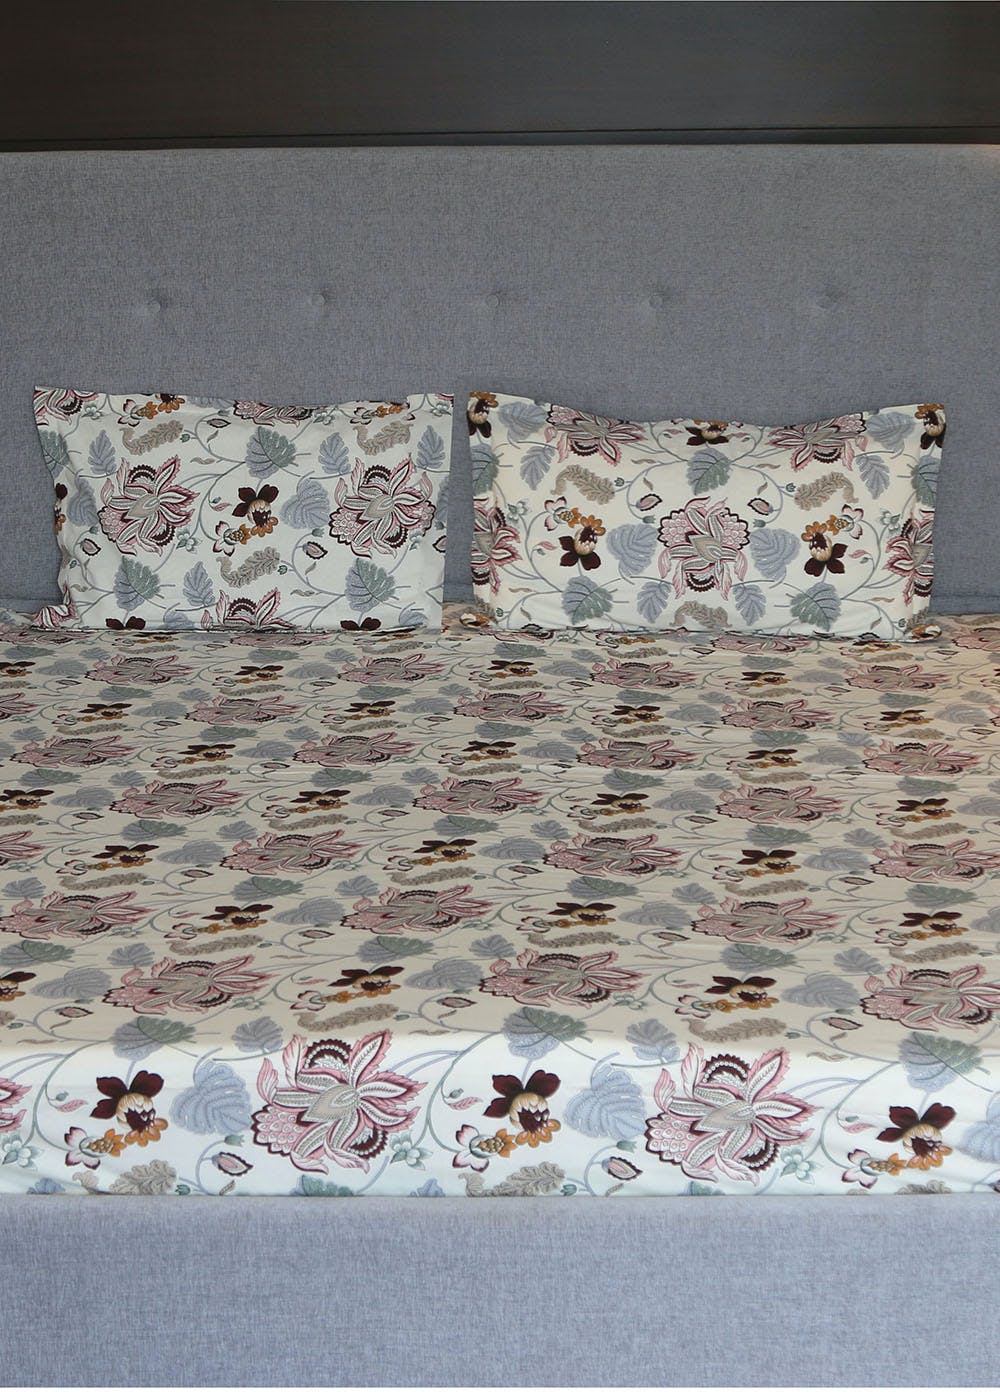 Naaz Fine Cotton Floral Bedsheet With 2 Pillow Covers - King Size Or 90 X 108 Inch, Off White, Pink & Grey